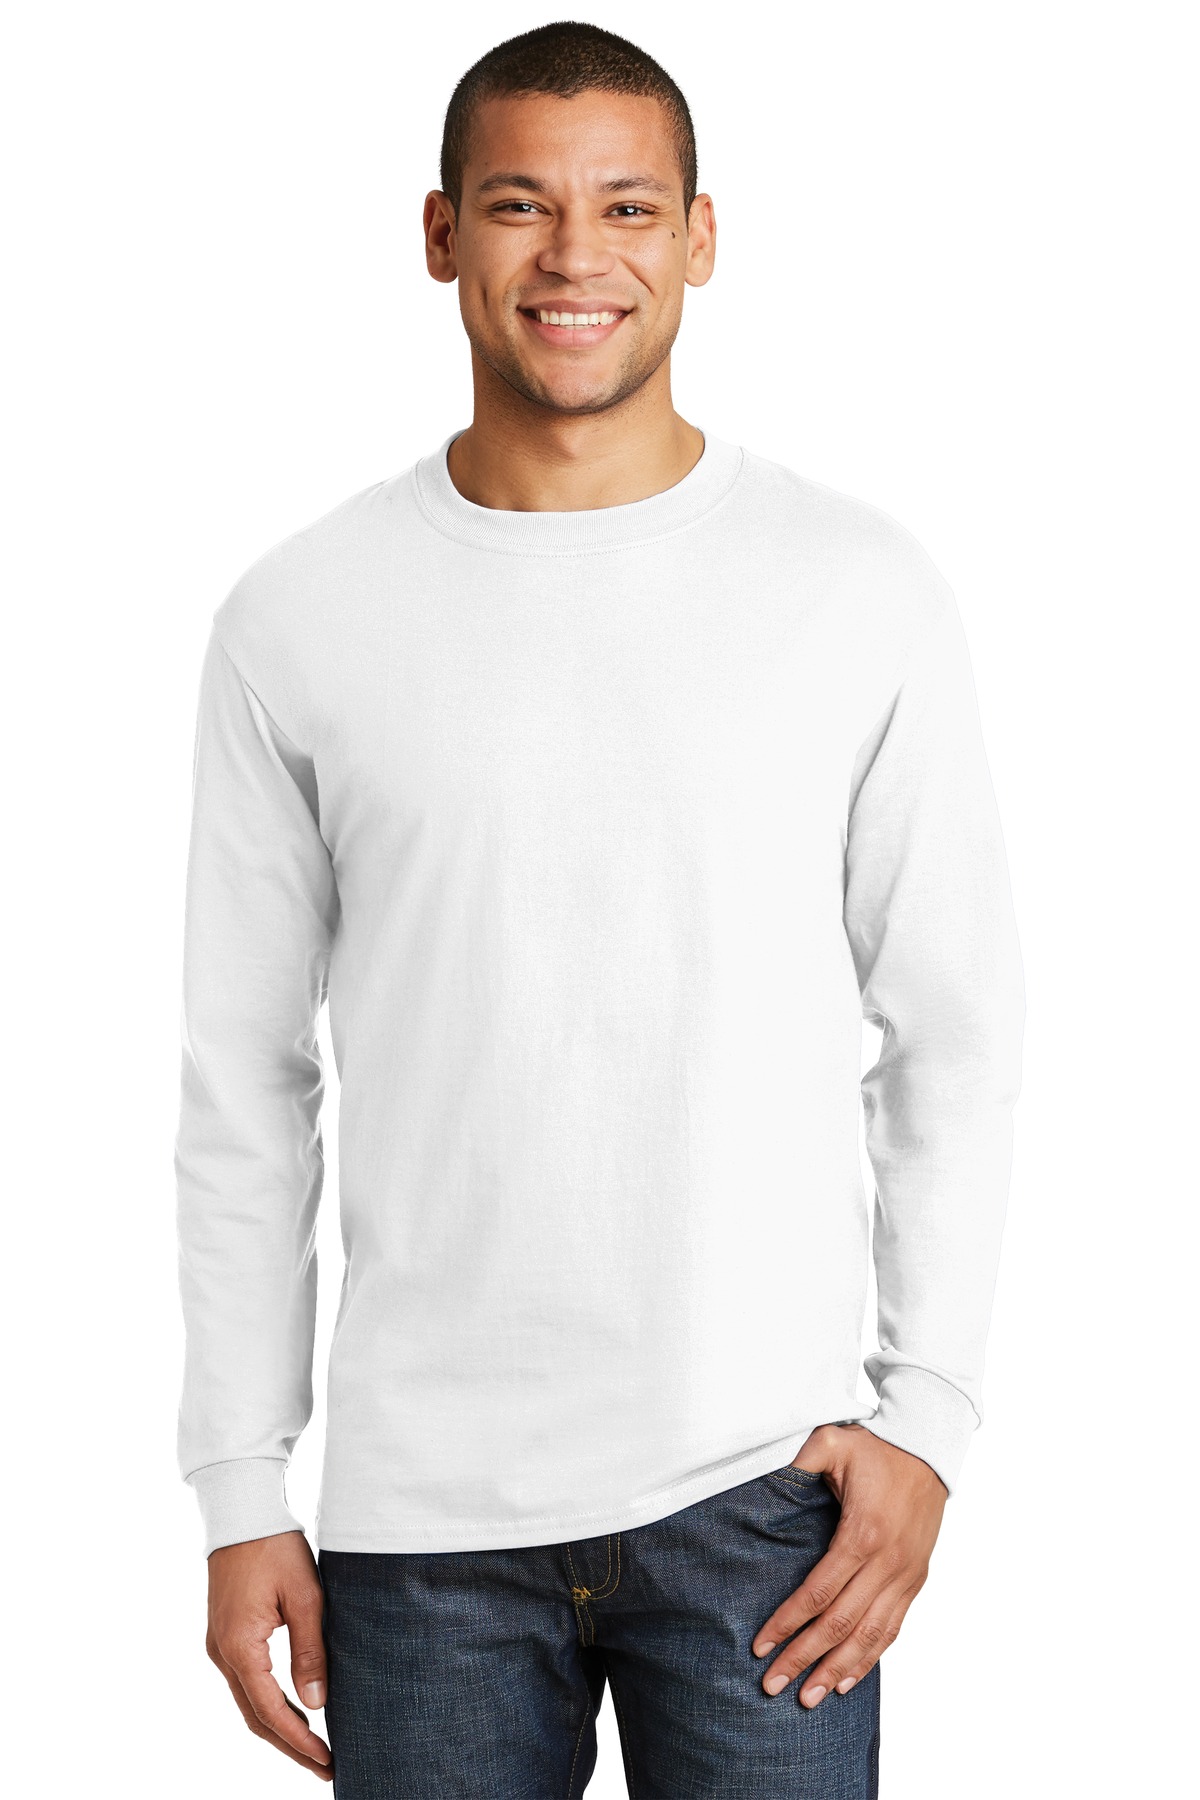 Hanes T-Shirts for Corporate Hospitality ® Beefy-T® - 100% Cotton Long Sleeve T-Shirt.-Hanes